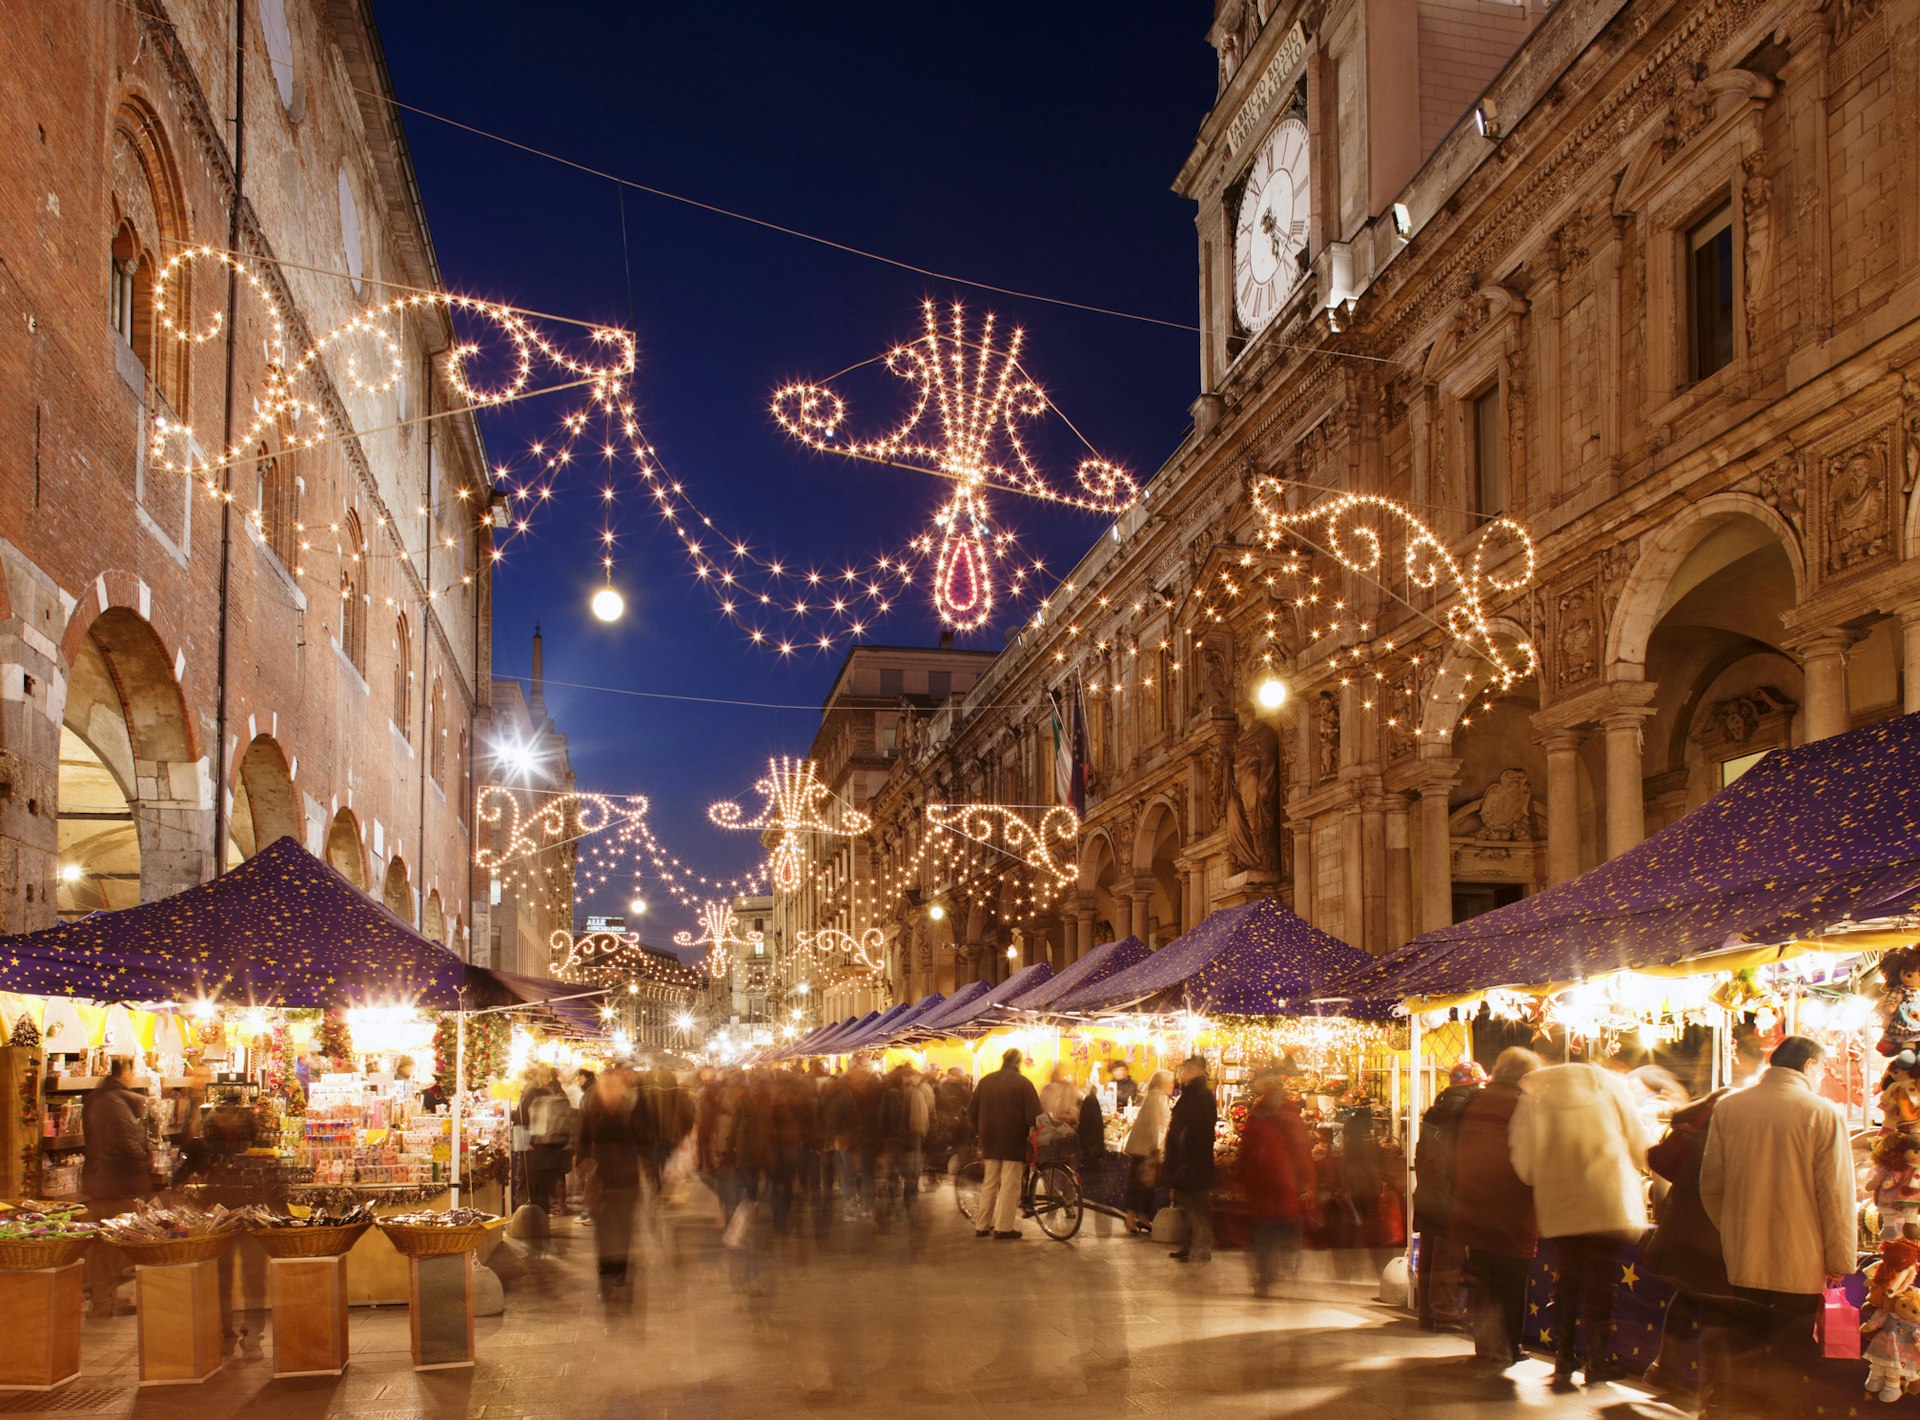 People walk the streets and browse stalls in one of Milan's Christmas markets. The stalls are illuminated by bright fairy lights.